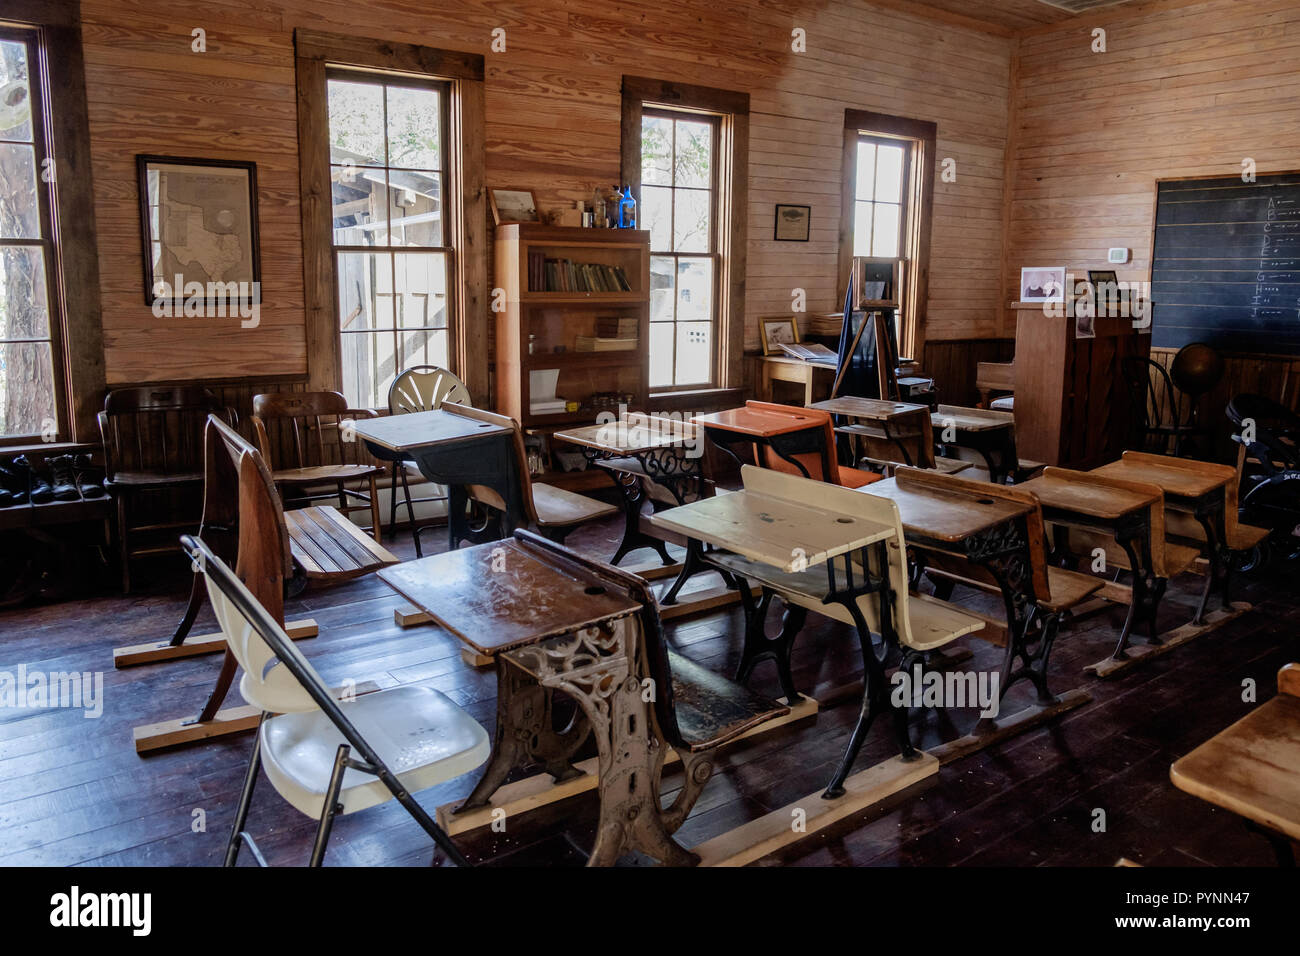 Vintage classroom in old one room schoolhouse with  rustic wooden desks and chairs. Wilmeth Schoolhouse, Chestnut Square, McKinney Texas. horizontal Stock Photo